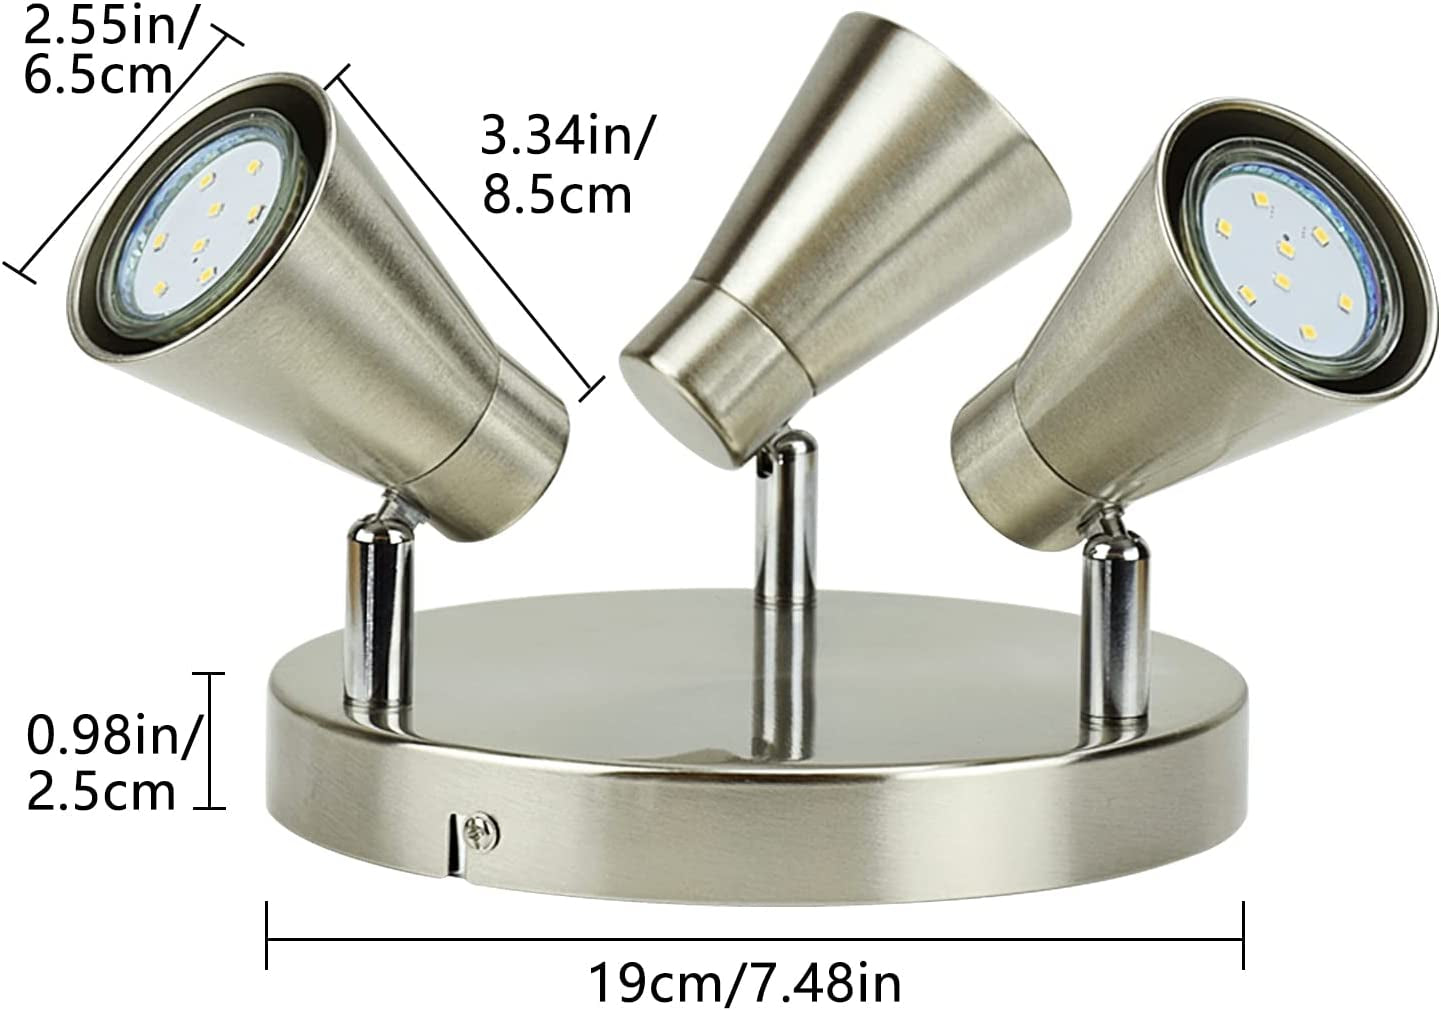 DLLT round Ceiling Spotlight Fixture, 3-Light Flush Mount Track Fixture Wall Lamp Directional for Kitchen, Bedroom, Dining Room, Office, Brushed Nickel, Gu10 Bulbs Included